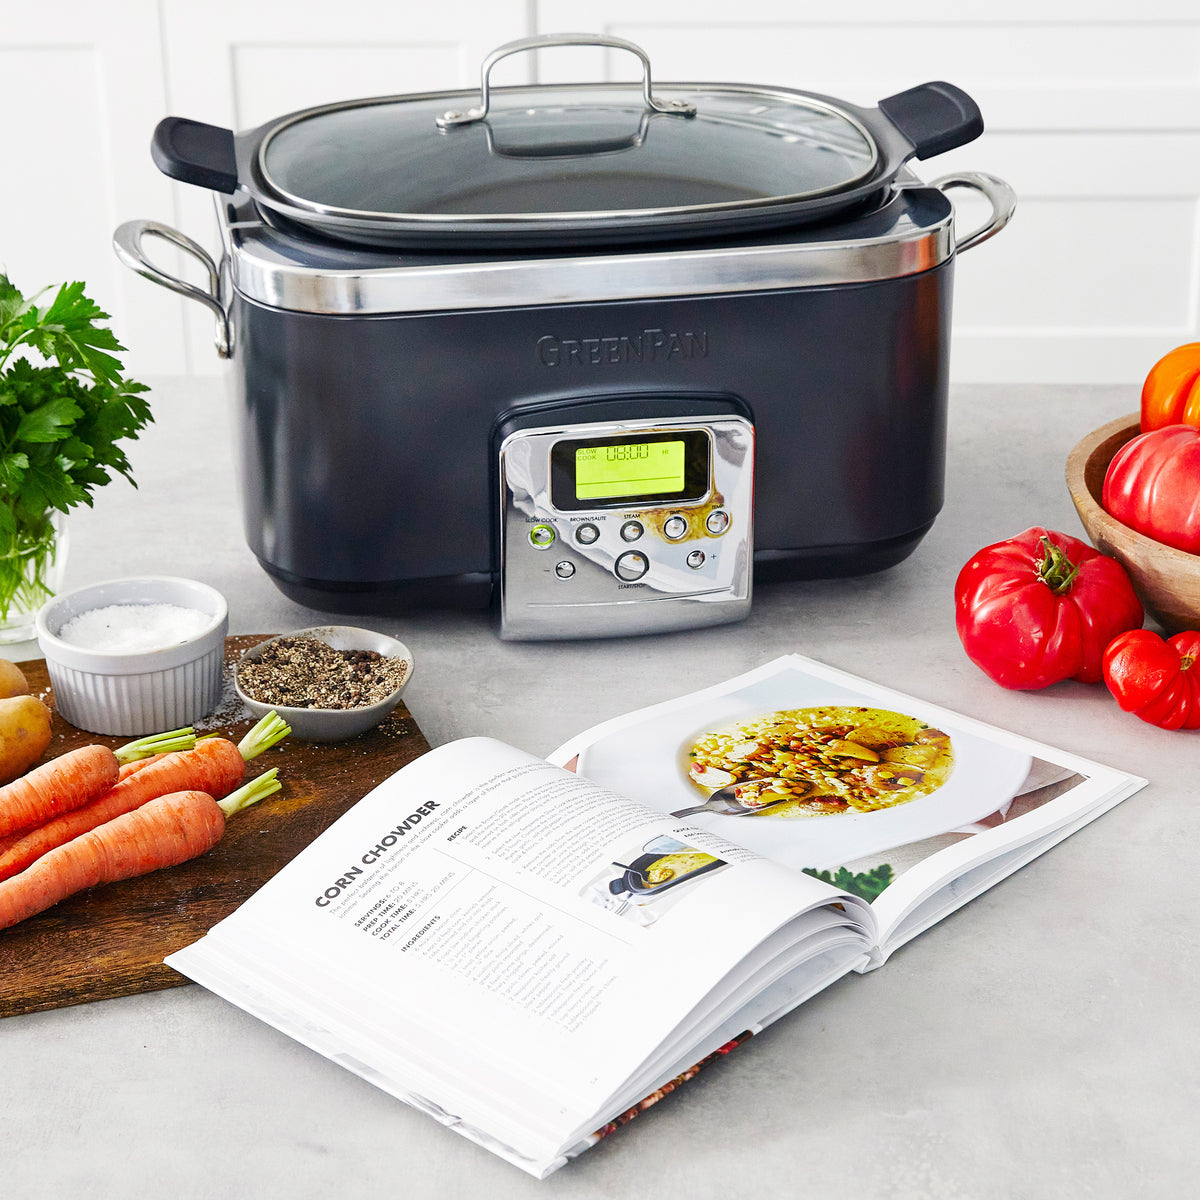 The All-Clad slow cooker is on sale for $30 off at